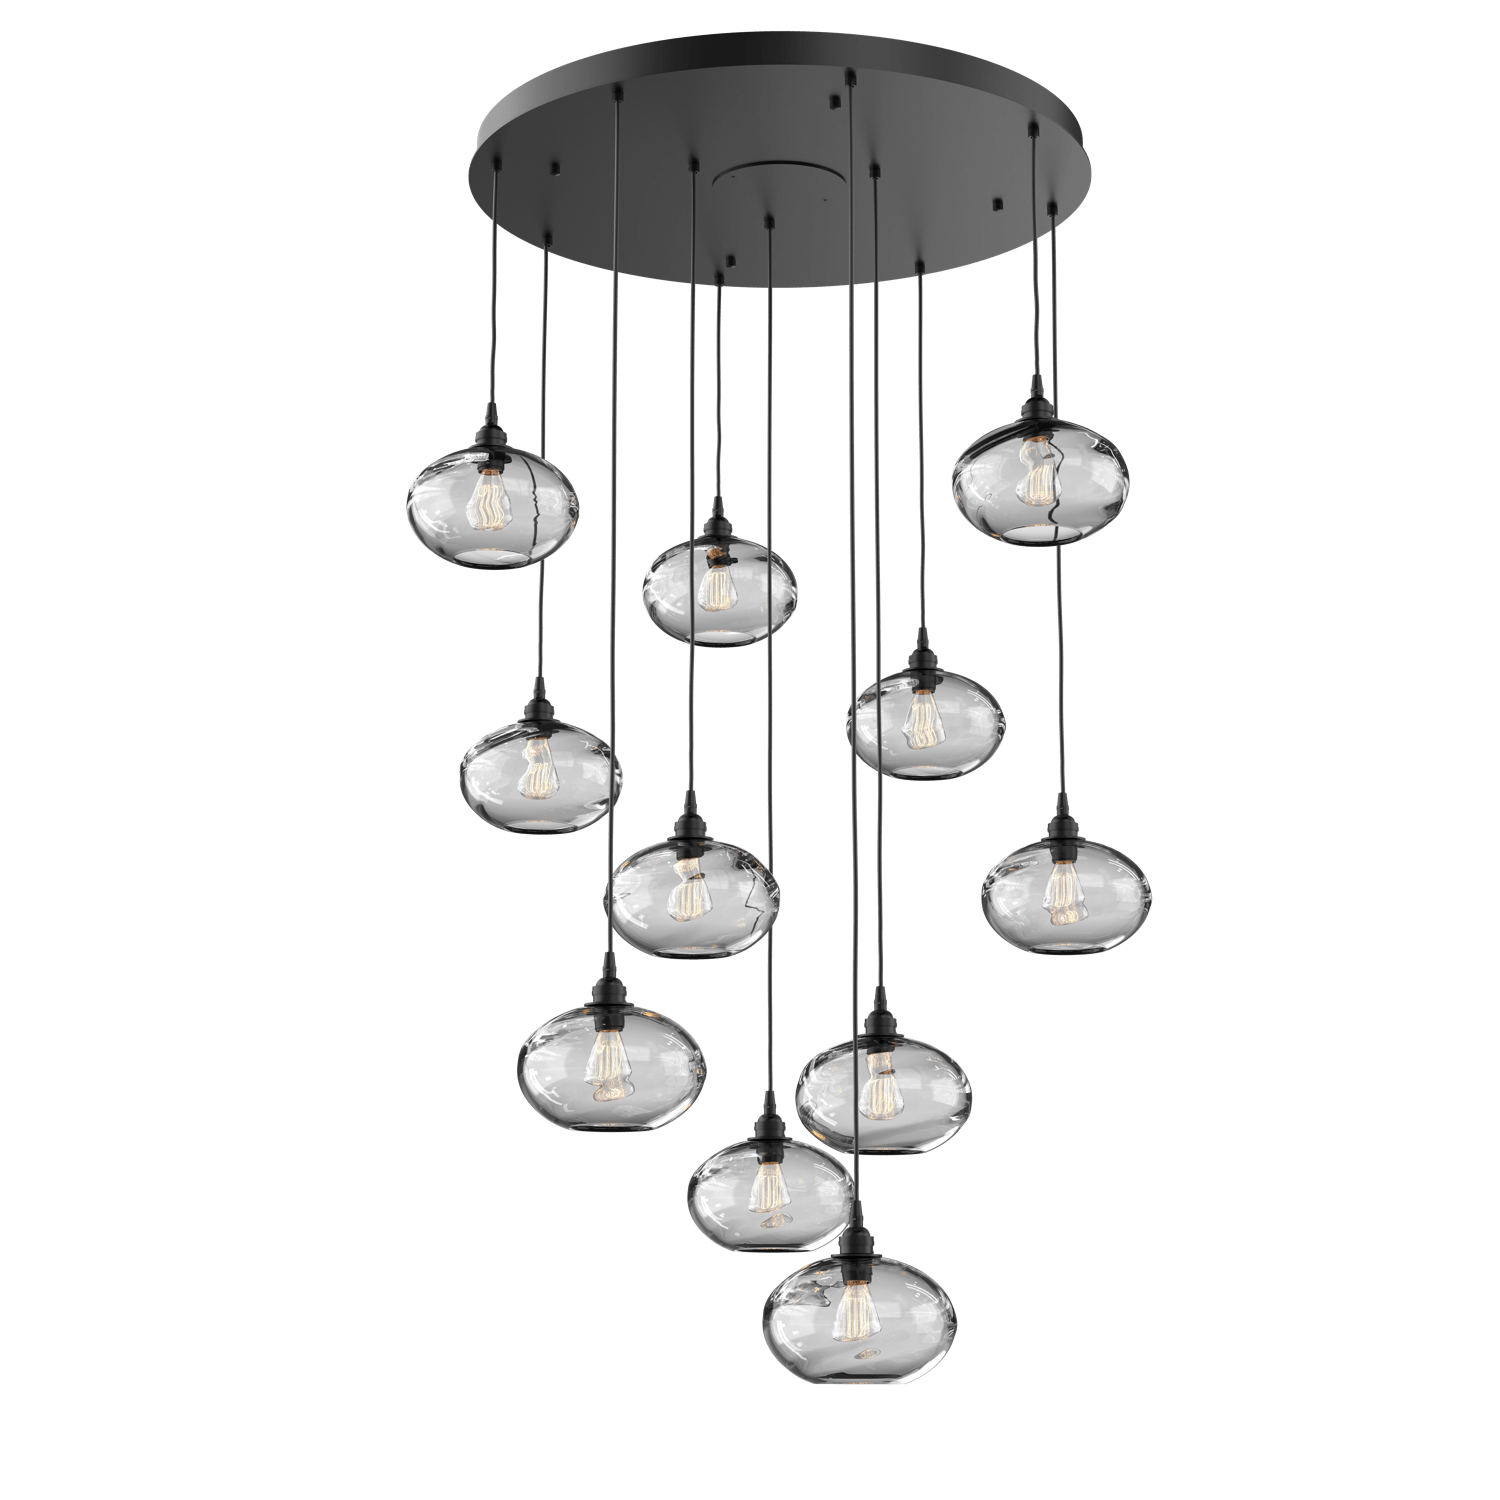 CHB0036-11-MB-OC-Hammerton-Studio-Optic-Blown-Glass-Coppa-11-light-round-pendant-chandelier-with-matte-black-finish-and-optic-clear-blown-glass-shades-and-incandescent-lamping